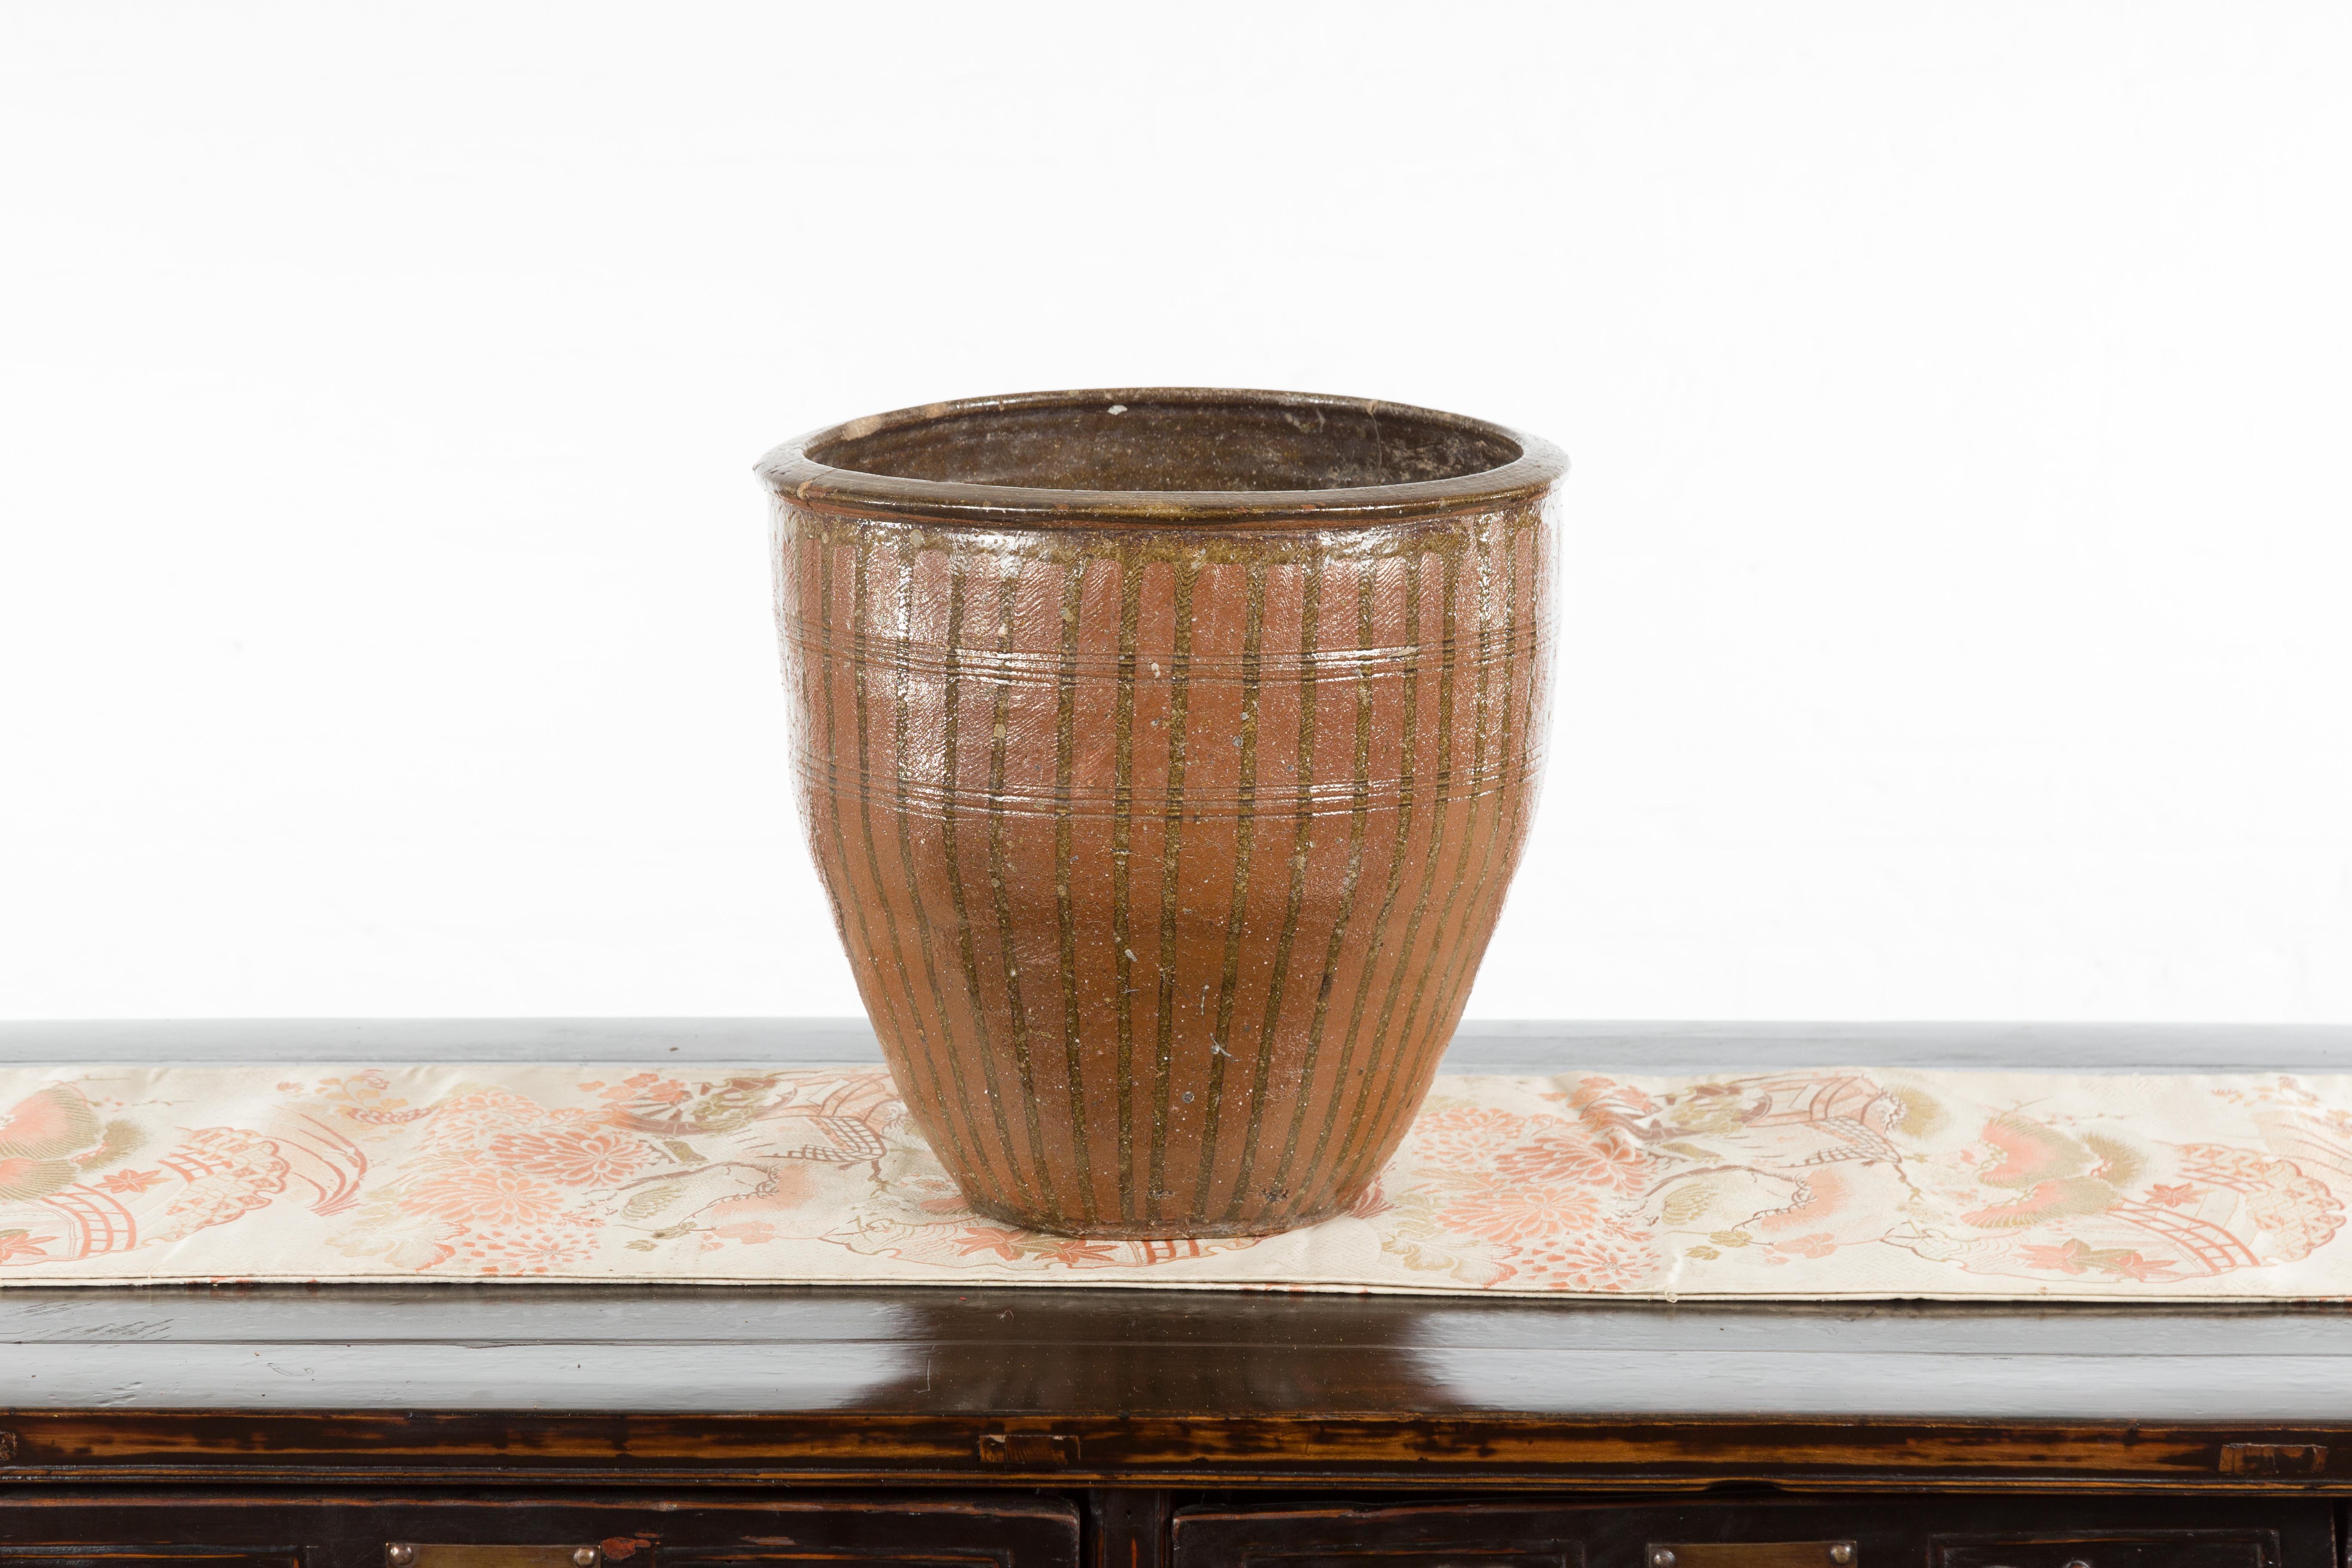 A Japanese antique Tamba Tachikui Ware pot from the early 20th century with dripping. Boasting a lovely brown color accented with dripping and horizontal incised accents, this Japanese pot was produced in one of Japan’s six famous ancient kilns.